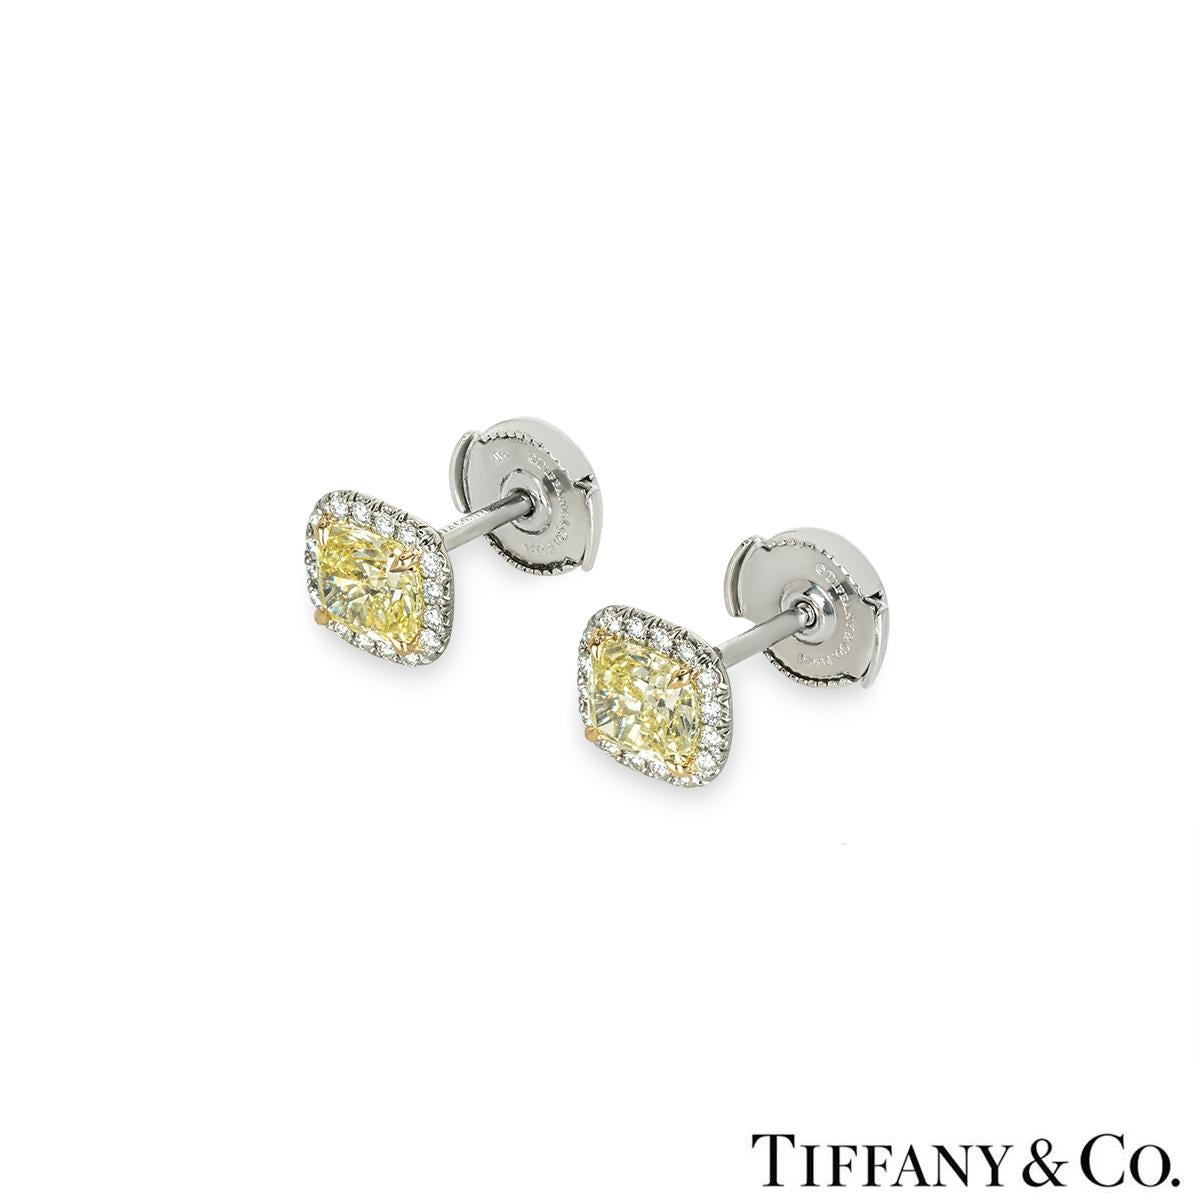 A magnificent pair of platinum diamond earrings from the Soleste collection by Tiffany & Co. Each earring is set with a cushion cut fancy intense yellow diamond, complemented by a halo of pave set diamonds. The first diamond weighs 0.75ct, fancy